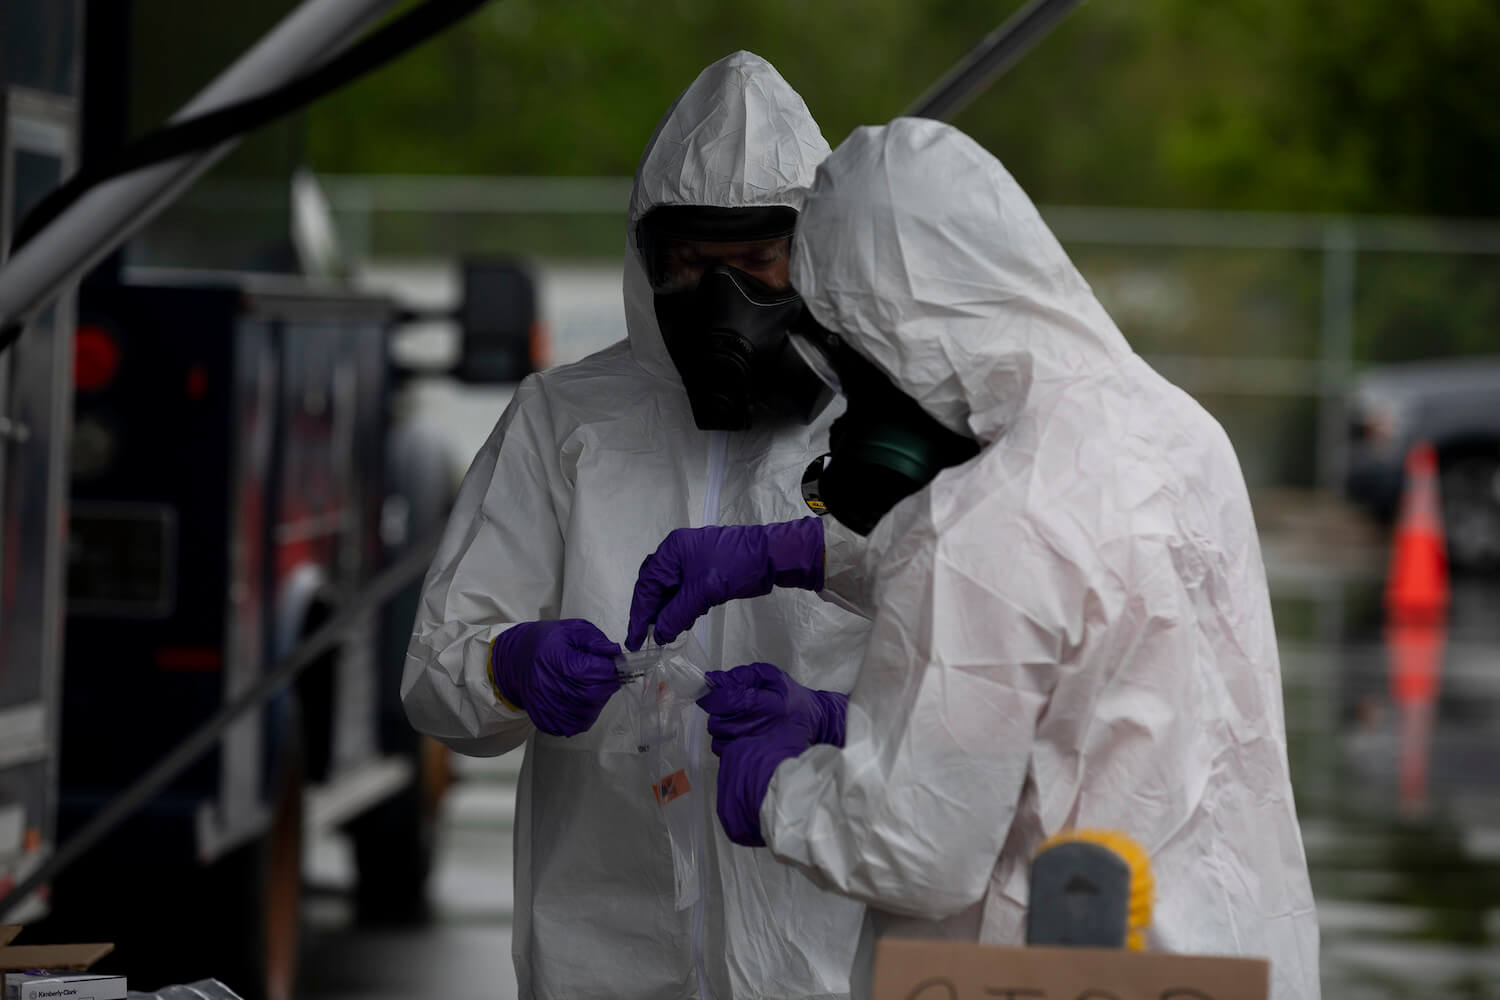 Two health officials wearing hazmat suits and gloves. August 2020